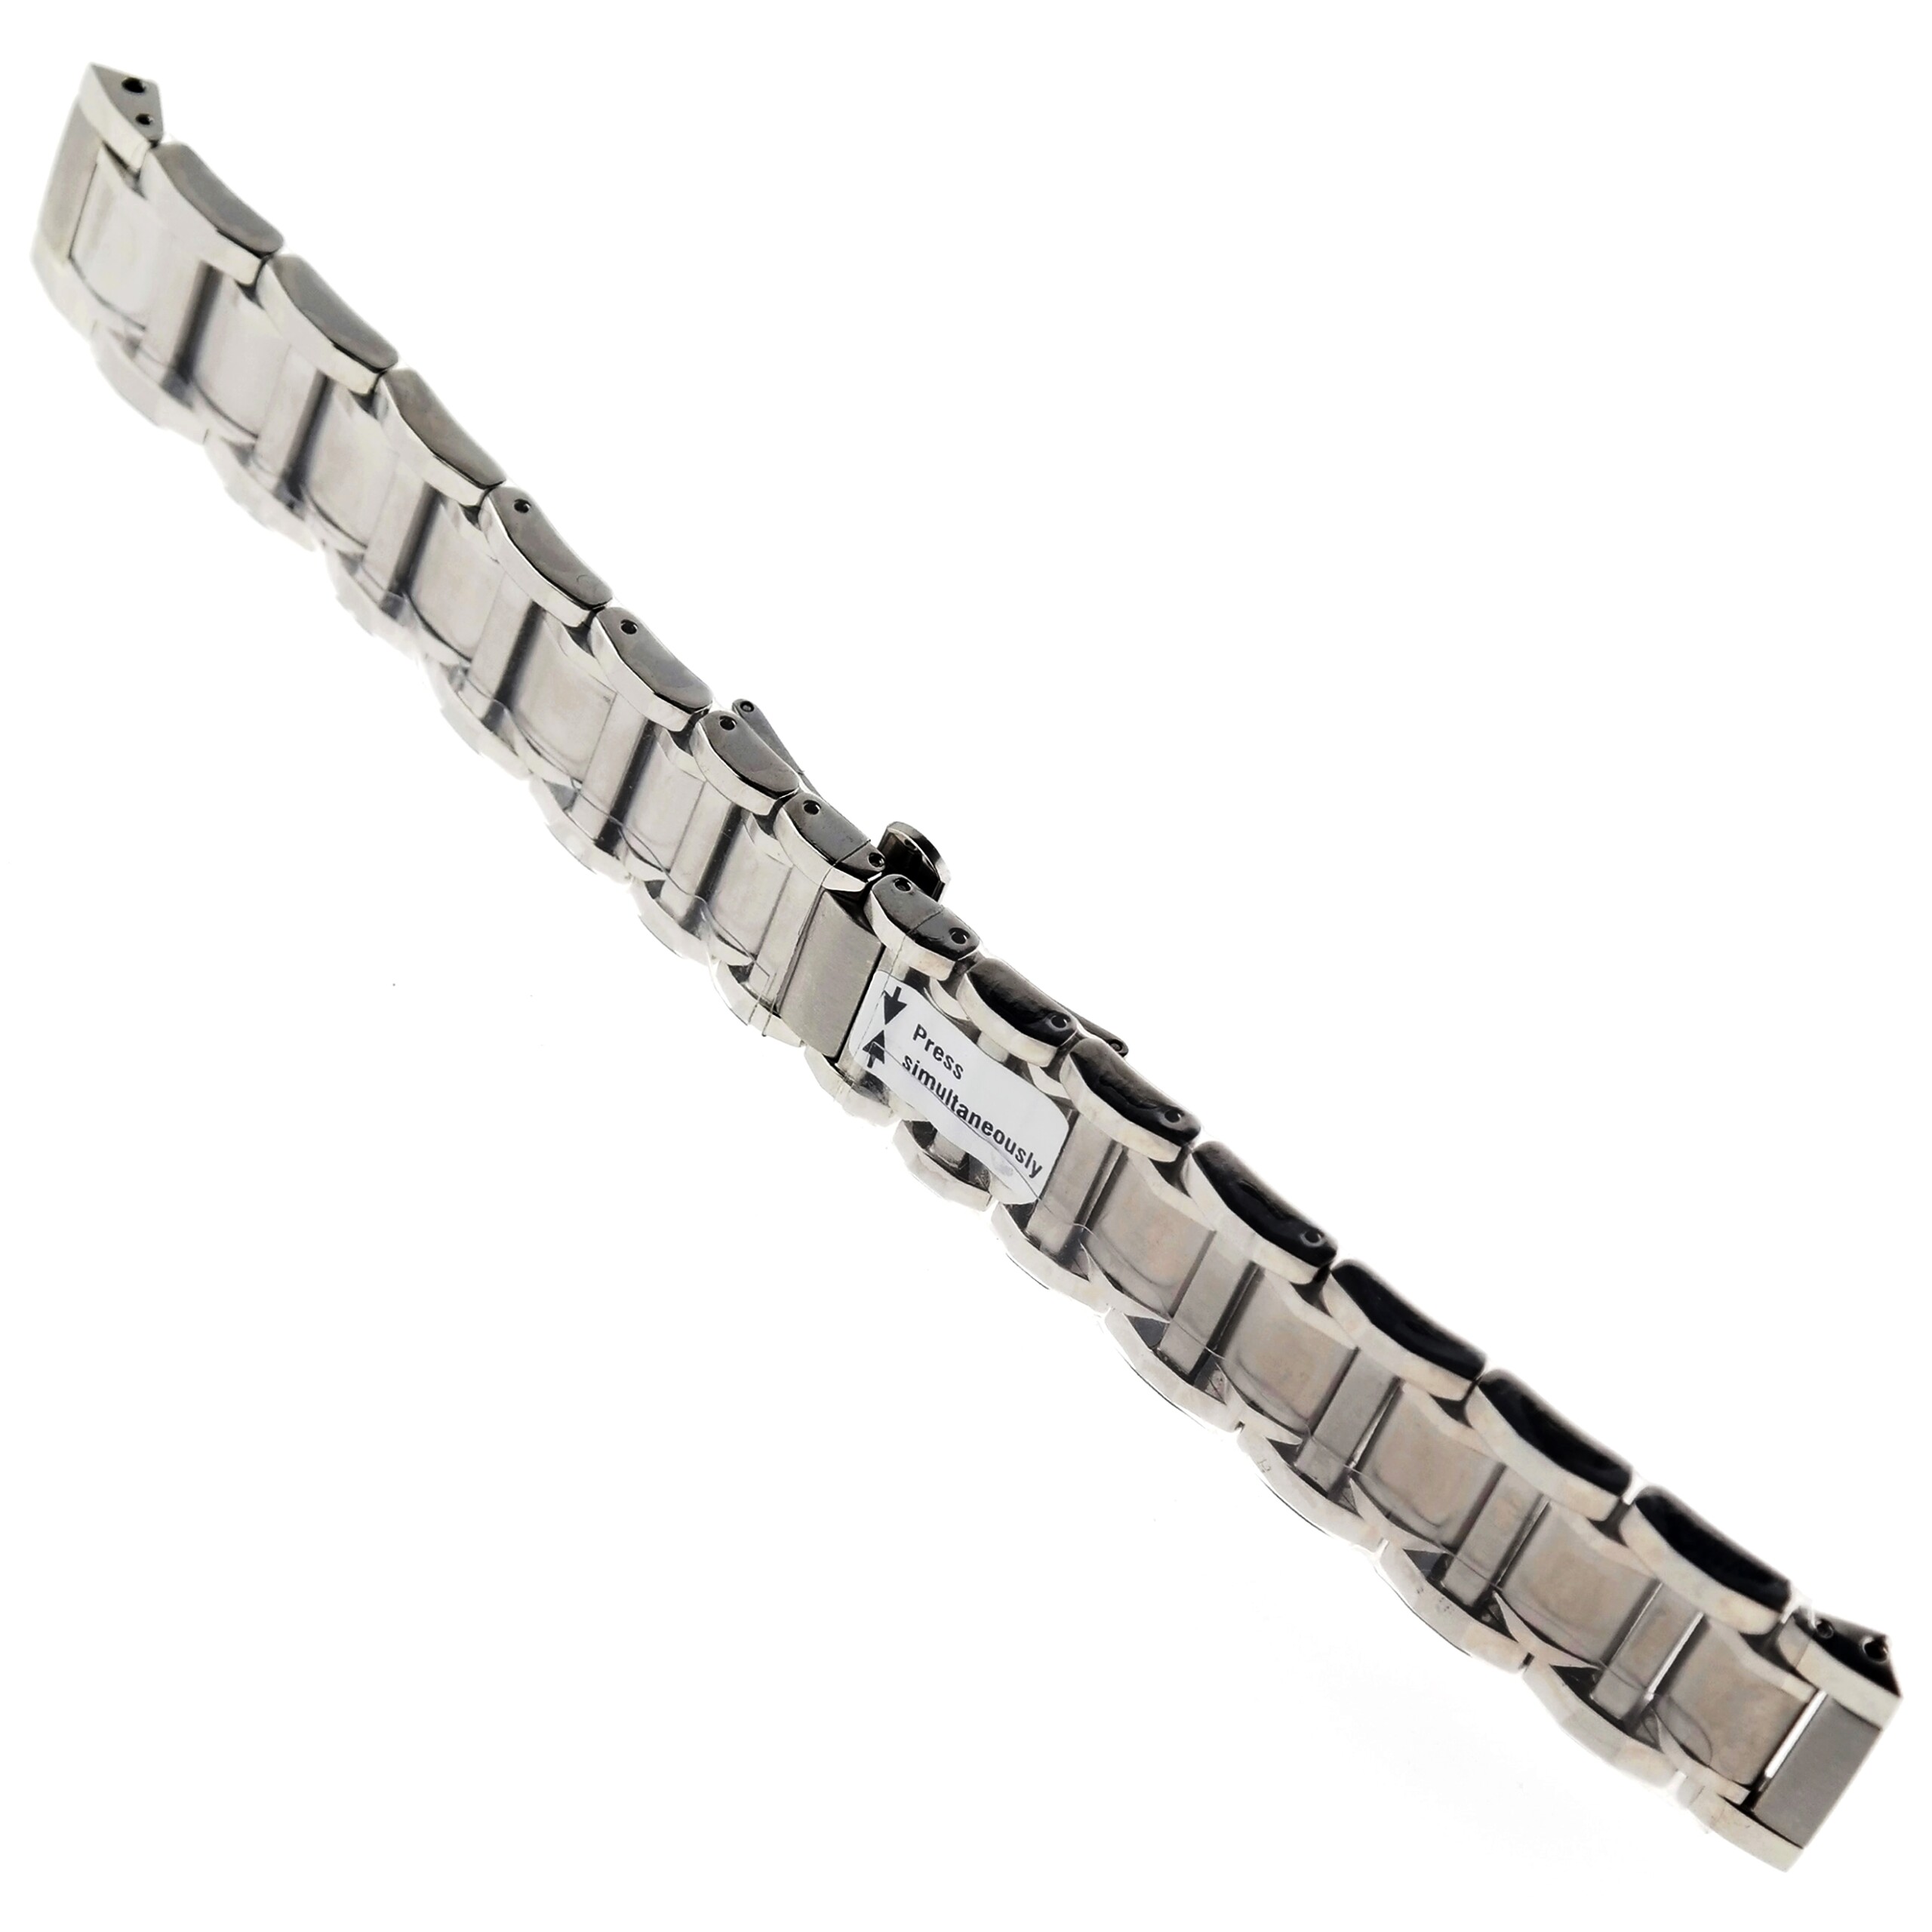 Authentic ZENITH - Stainless Steel Watch Bracelet - 20 mm